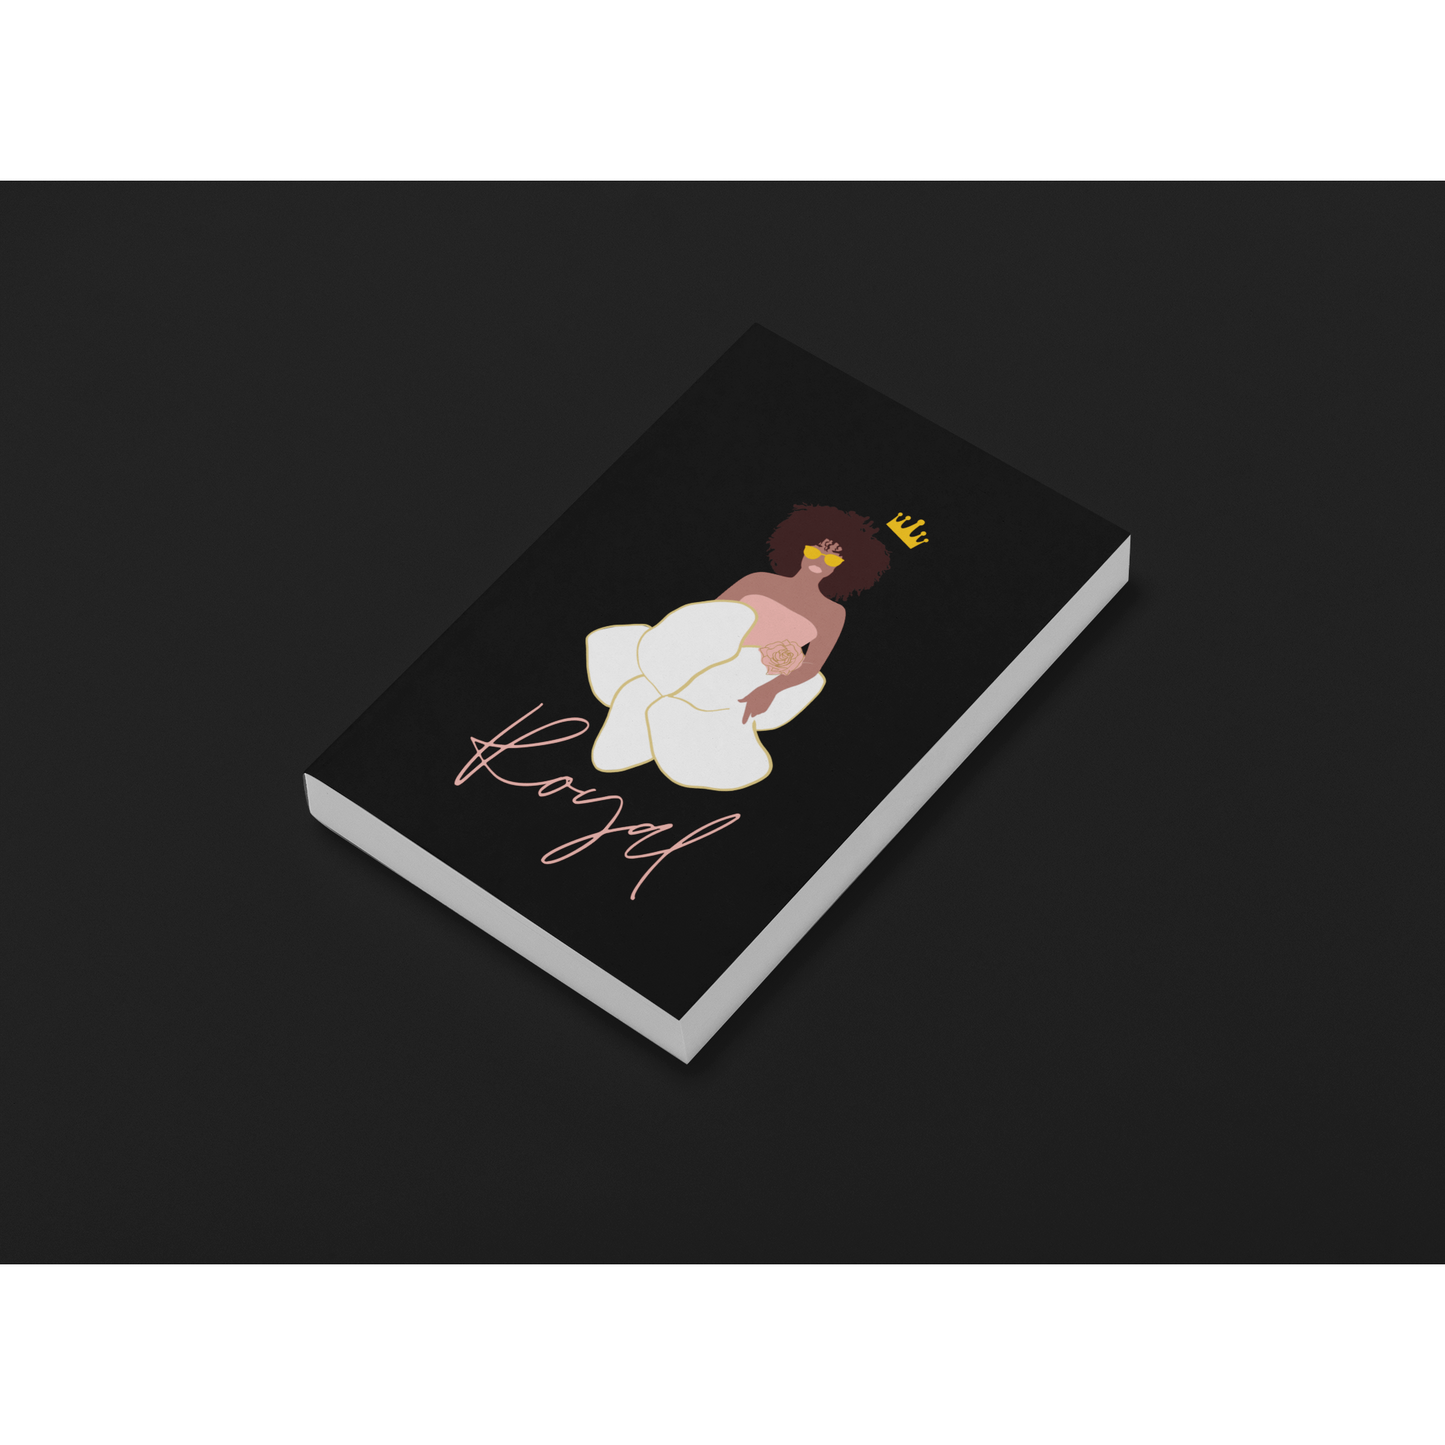 Royal | Black Girl Magic Journal for Women of Color: Diary, Gratitude, & Reflection | 200 Pages, 6"x9" Size